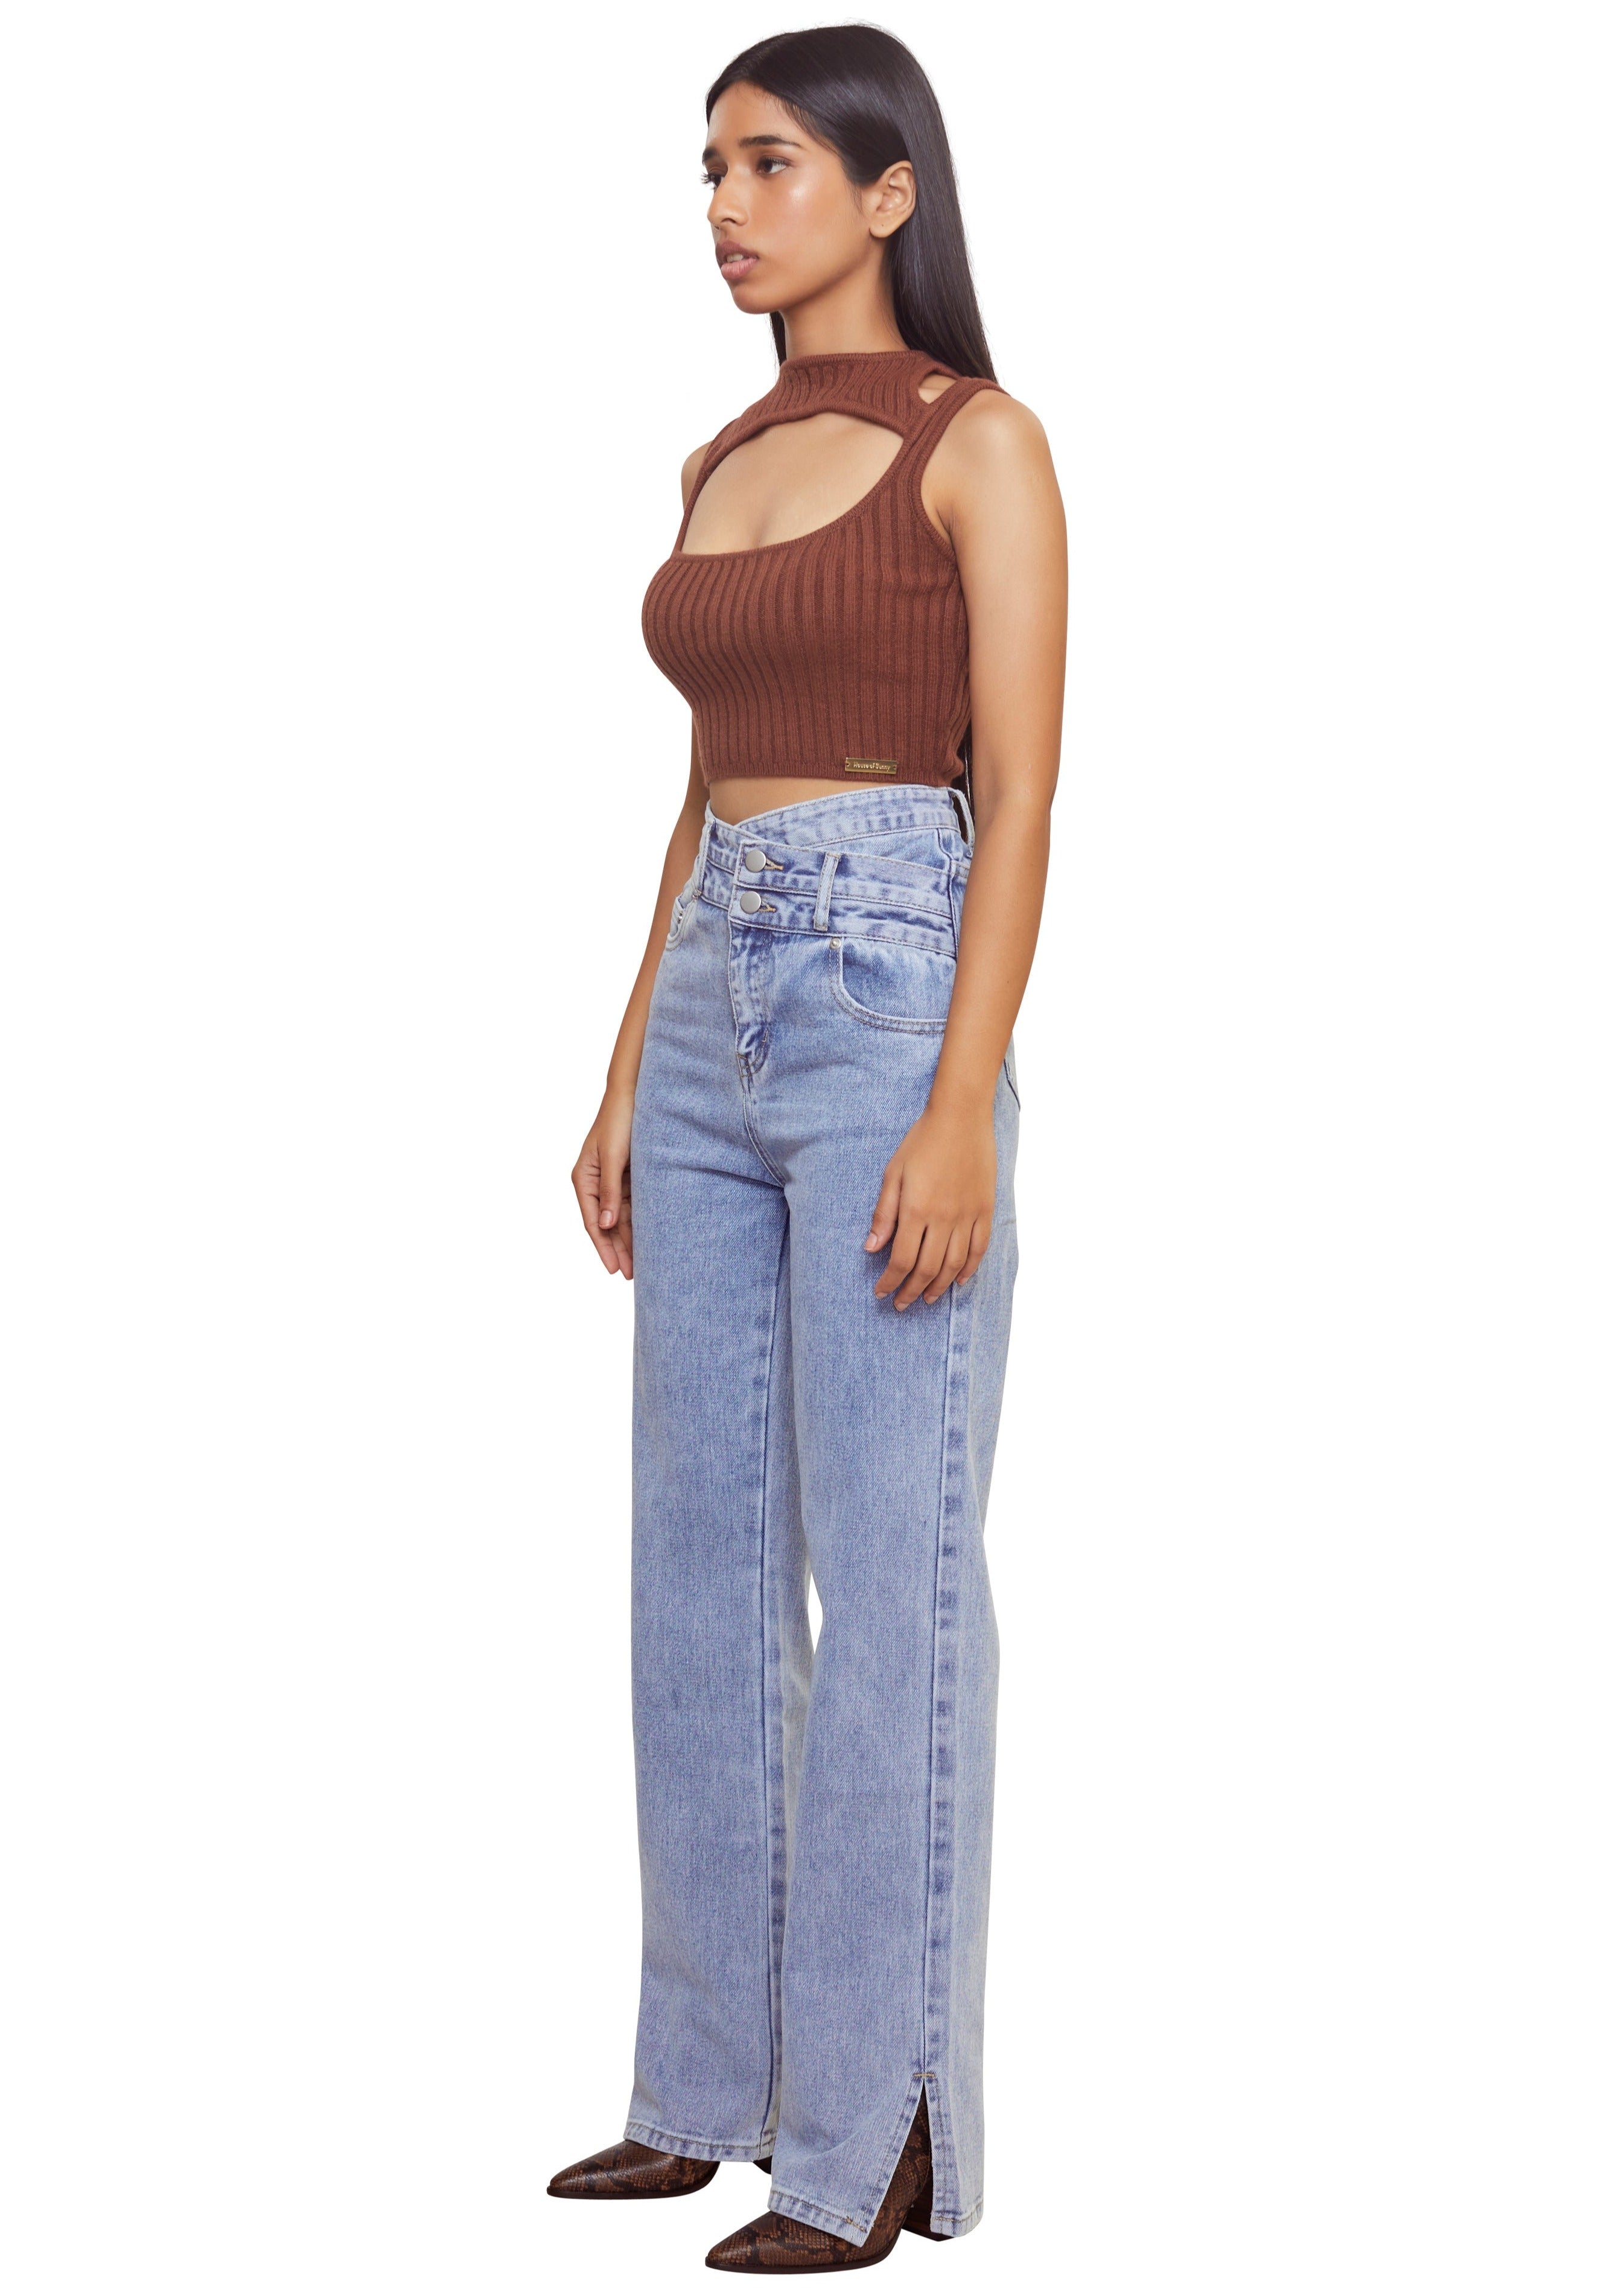 Blue high waisted straight jeans with two buttons and a criss cross waistline pattern from the brand The Kript